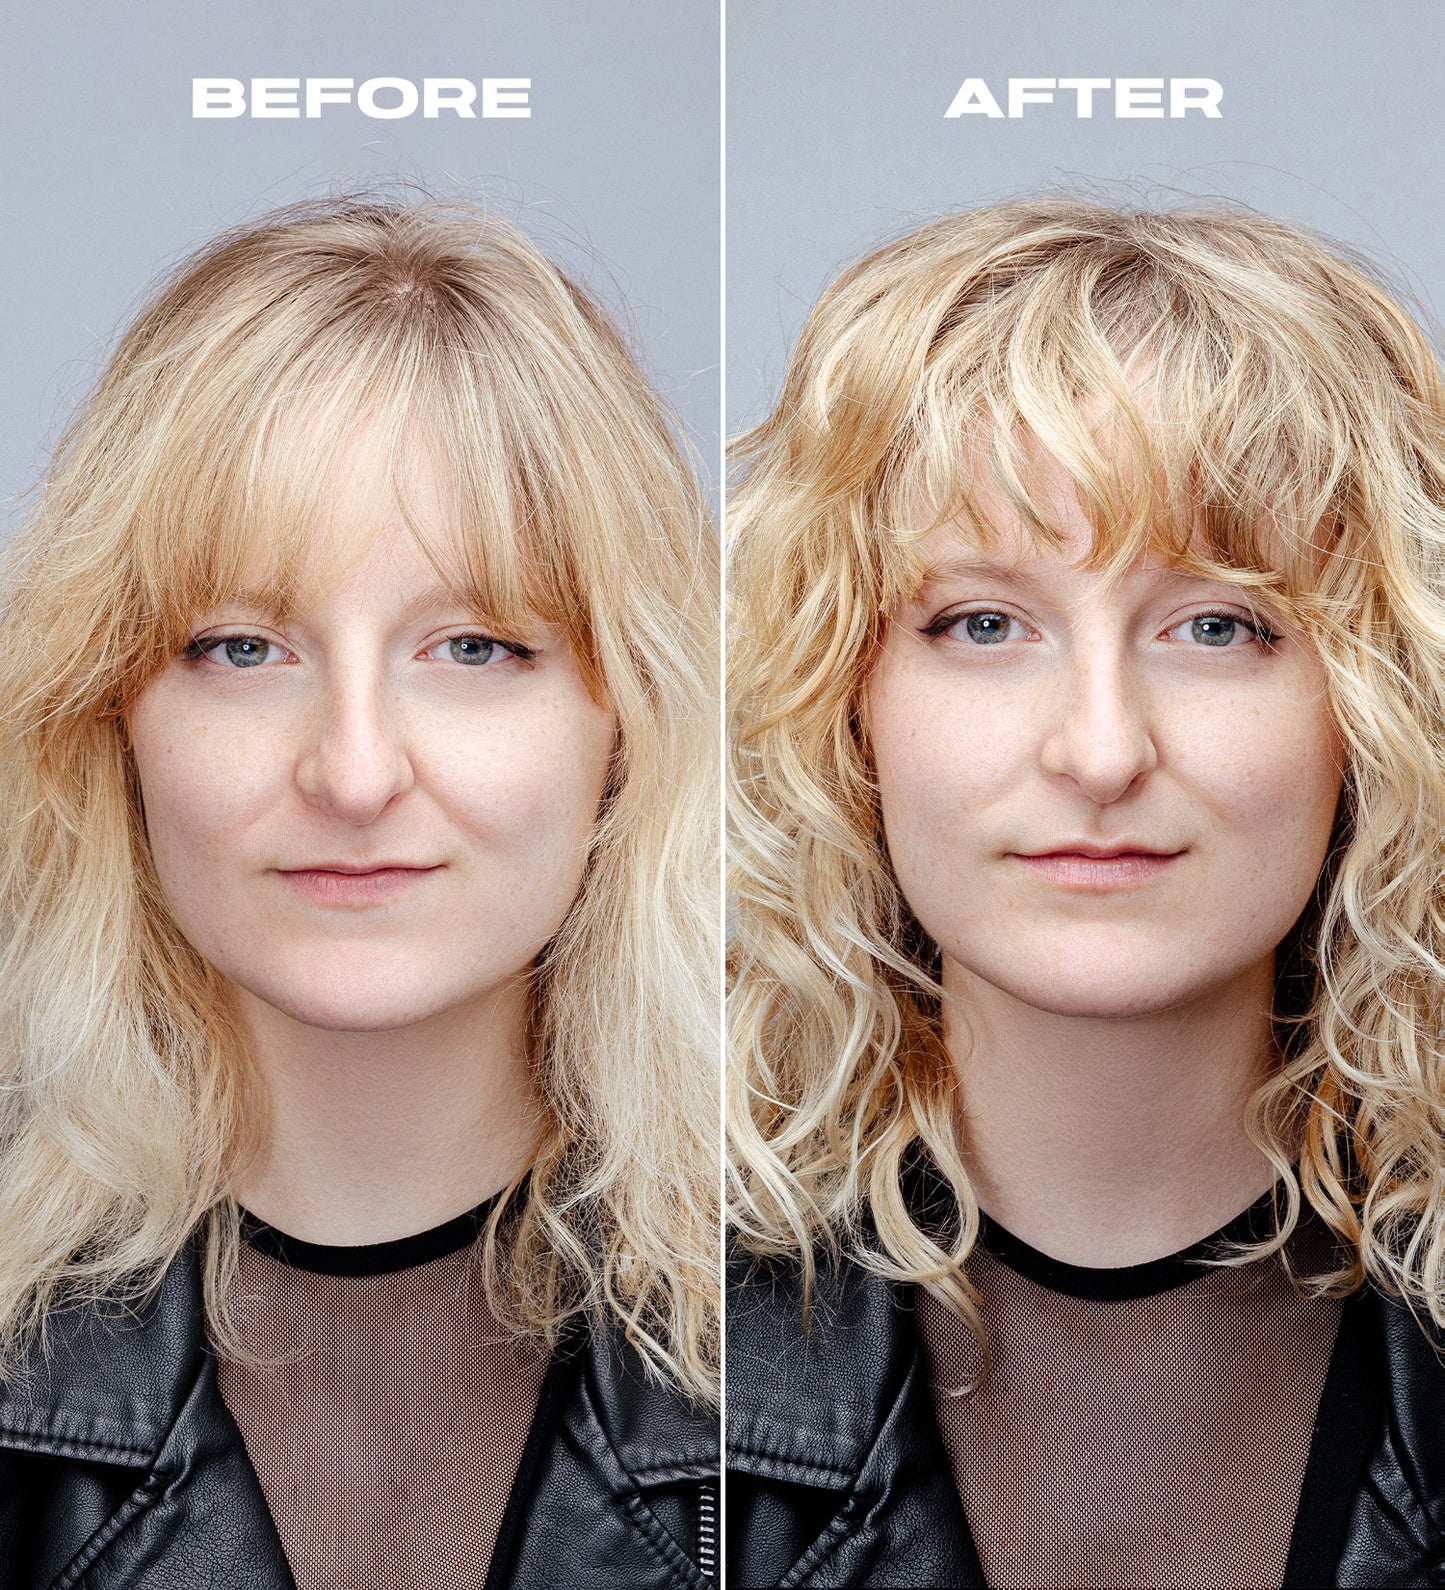 Female model examples of hair before and after using Wavetech Wave System Bundle